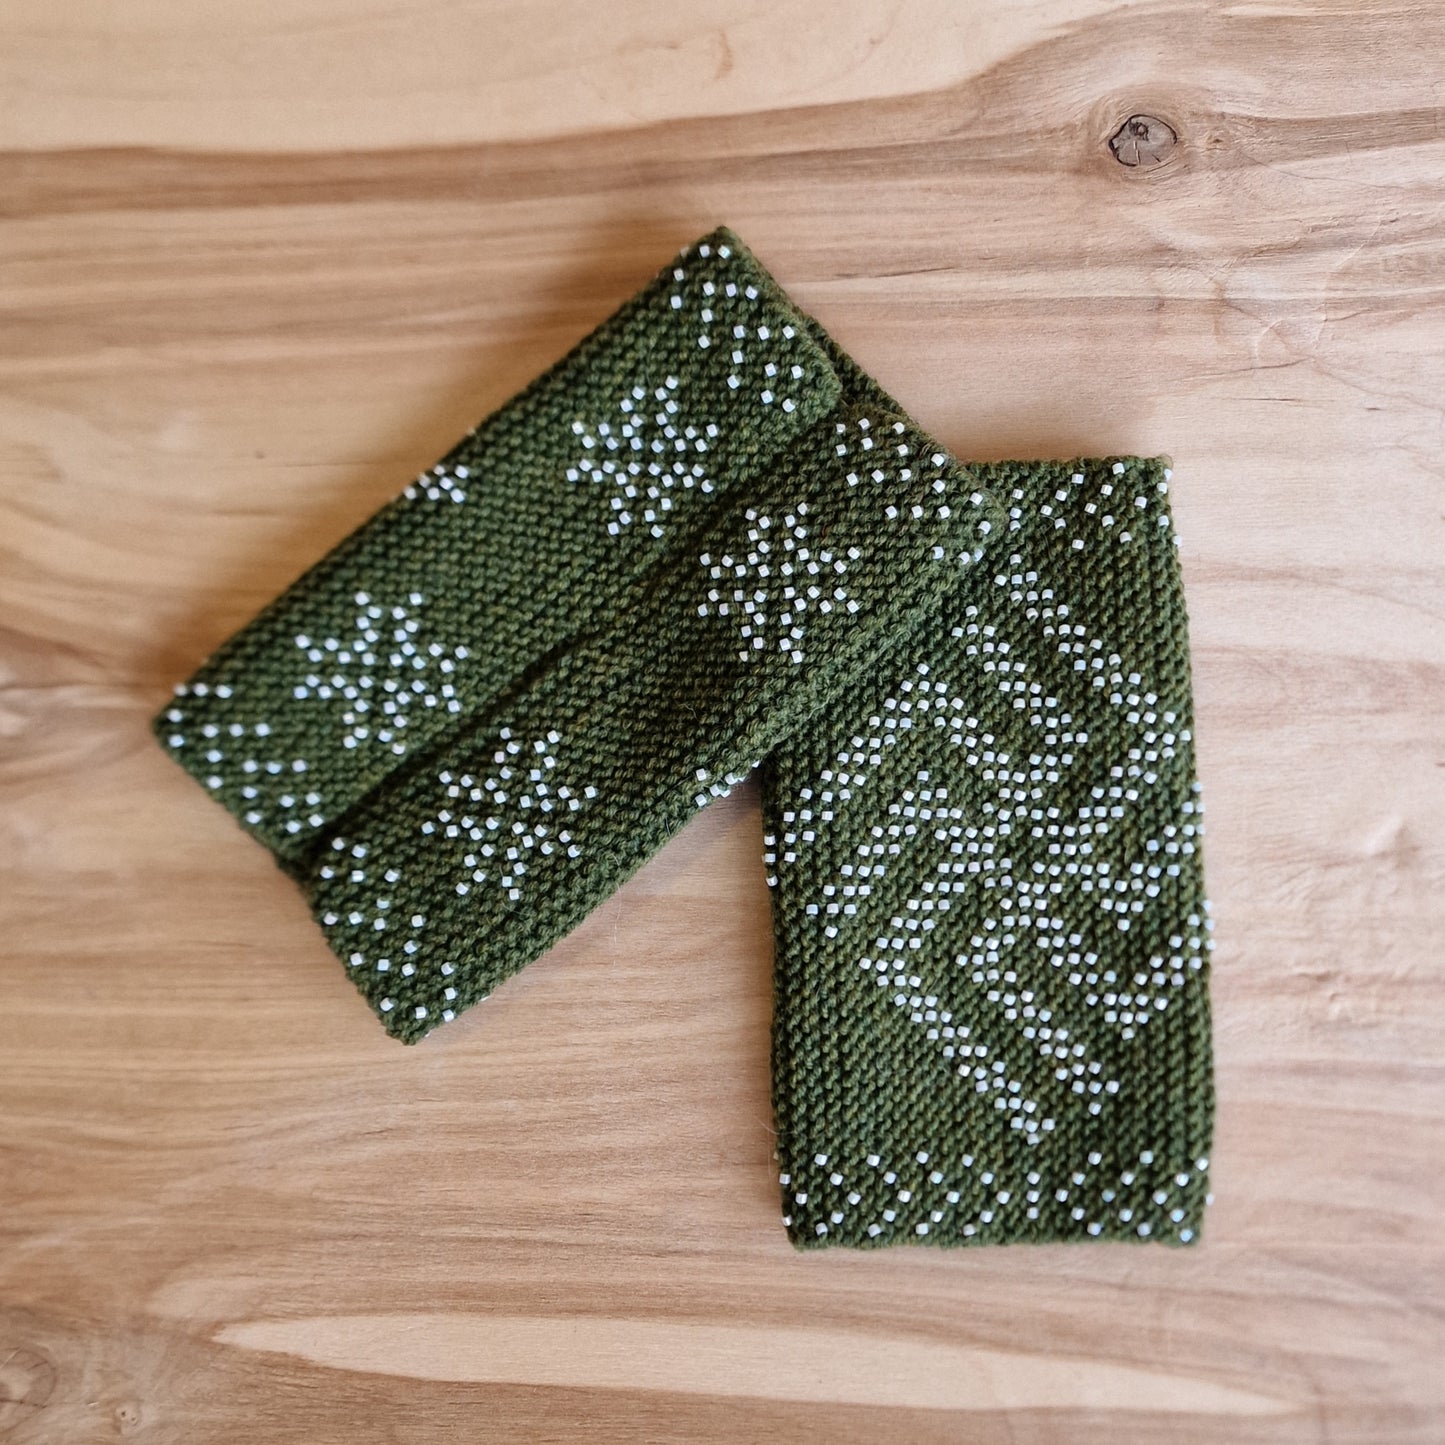 Moss Green Cuffs/Pulse Warmers with White Bead Fire Crosses (ZAMI 27)